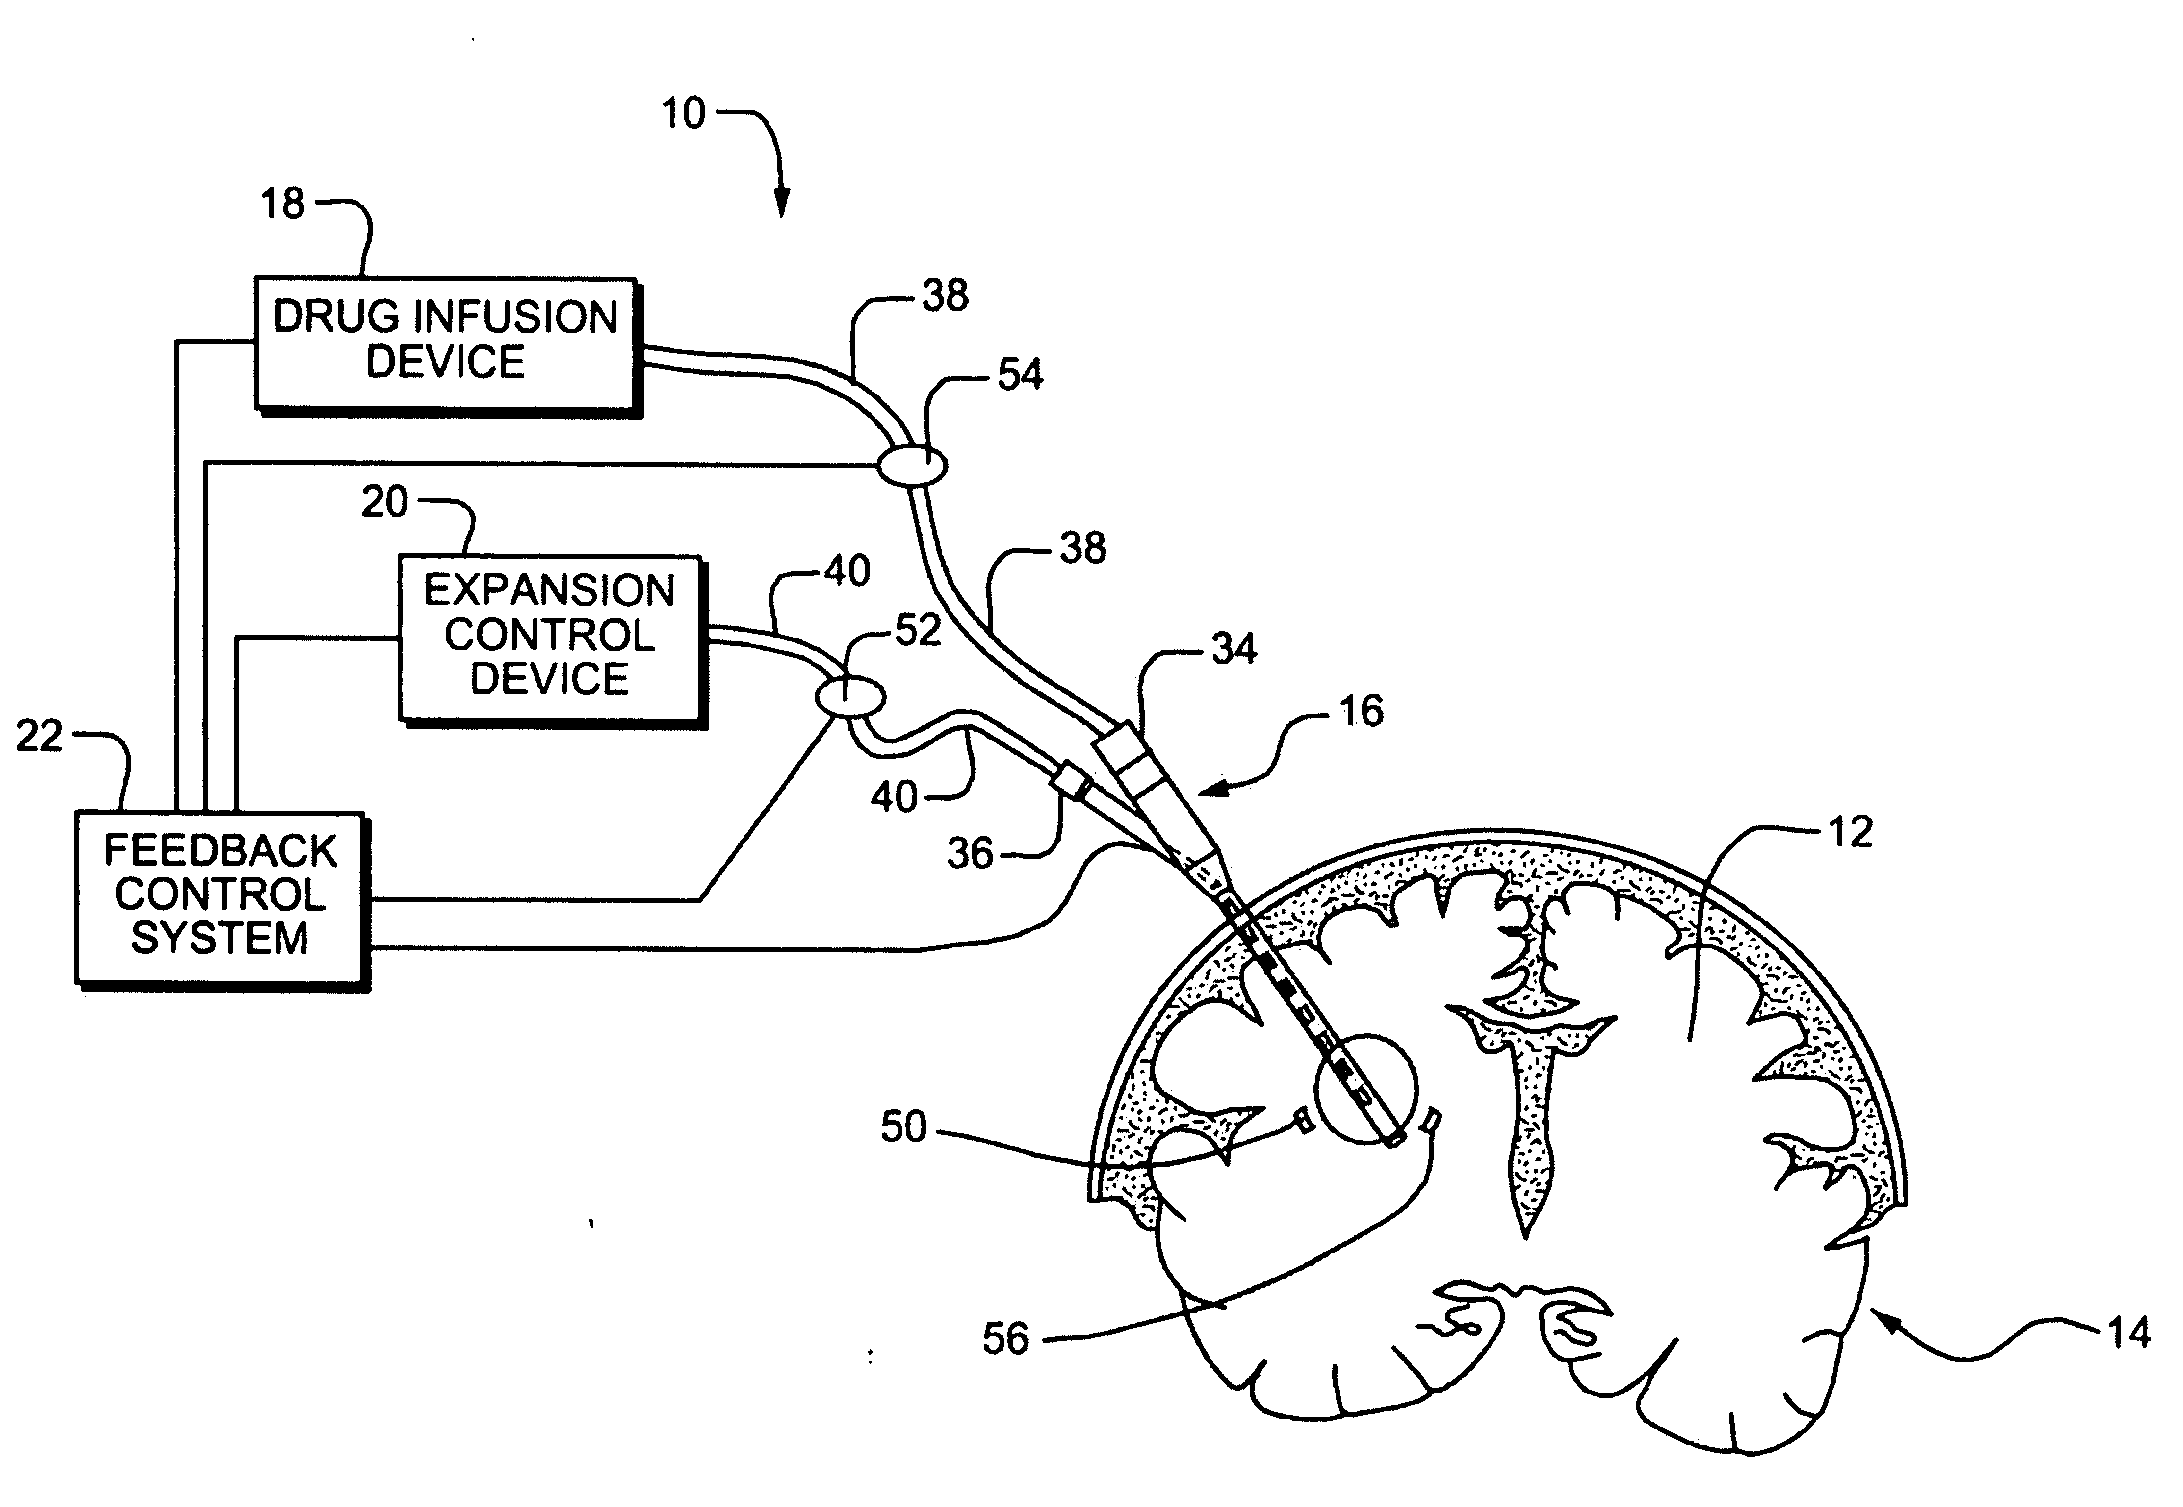 Systems and Methods for Drug Infusion with Feedback Control